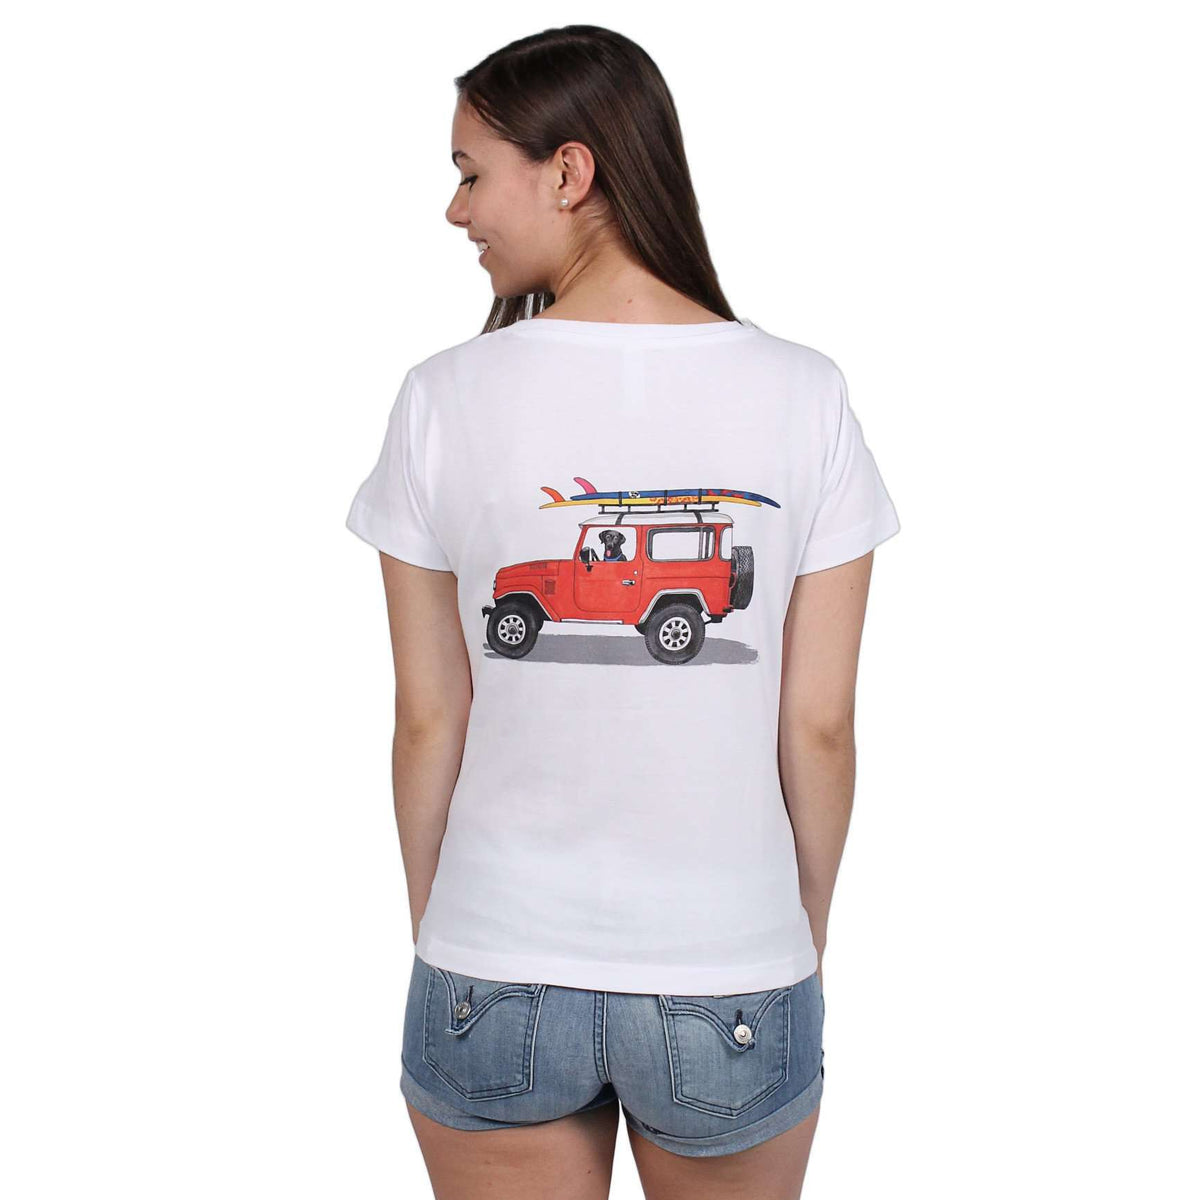 Ladies Wicked Landcruiser Tee in White by Chatham Ivy - Country Club Prep